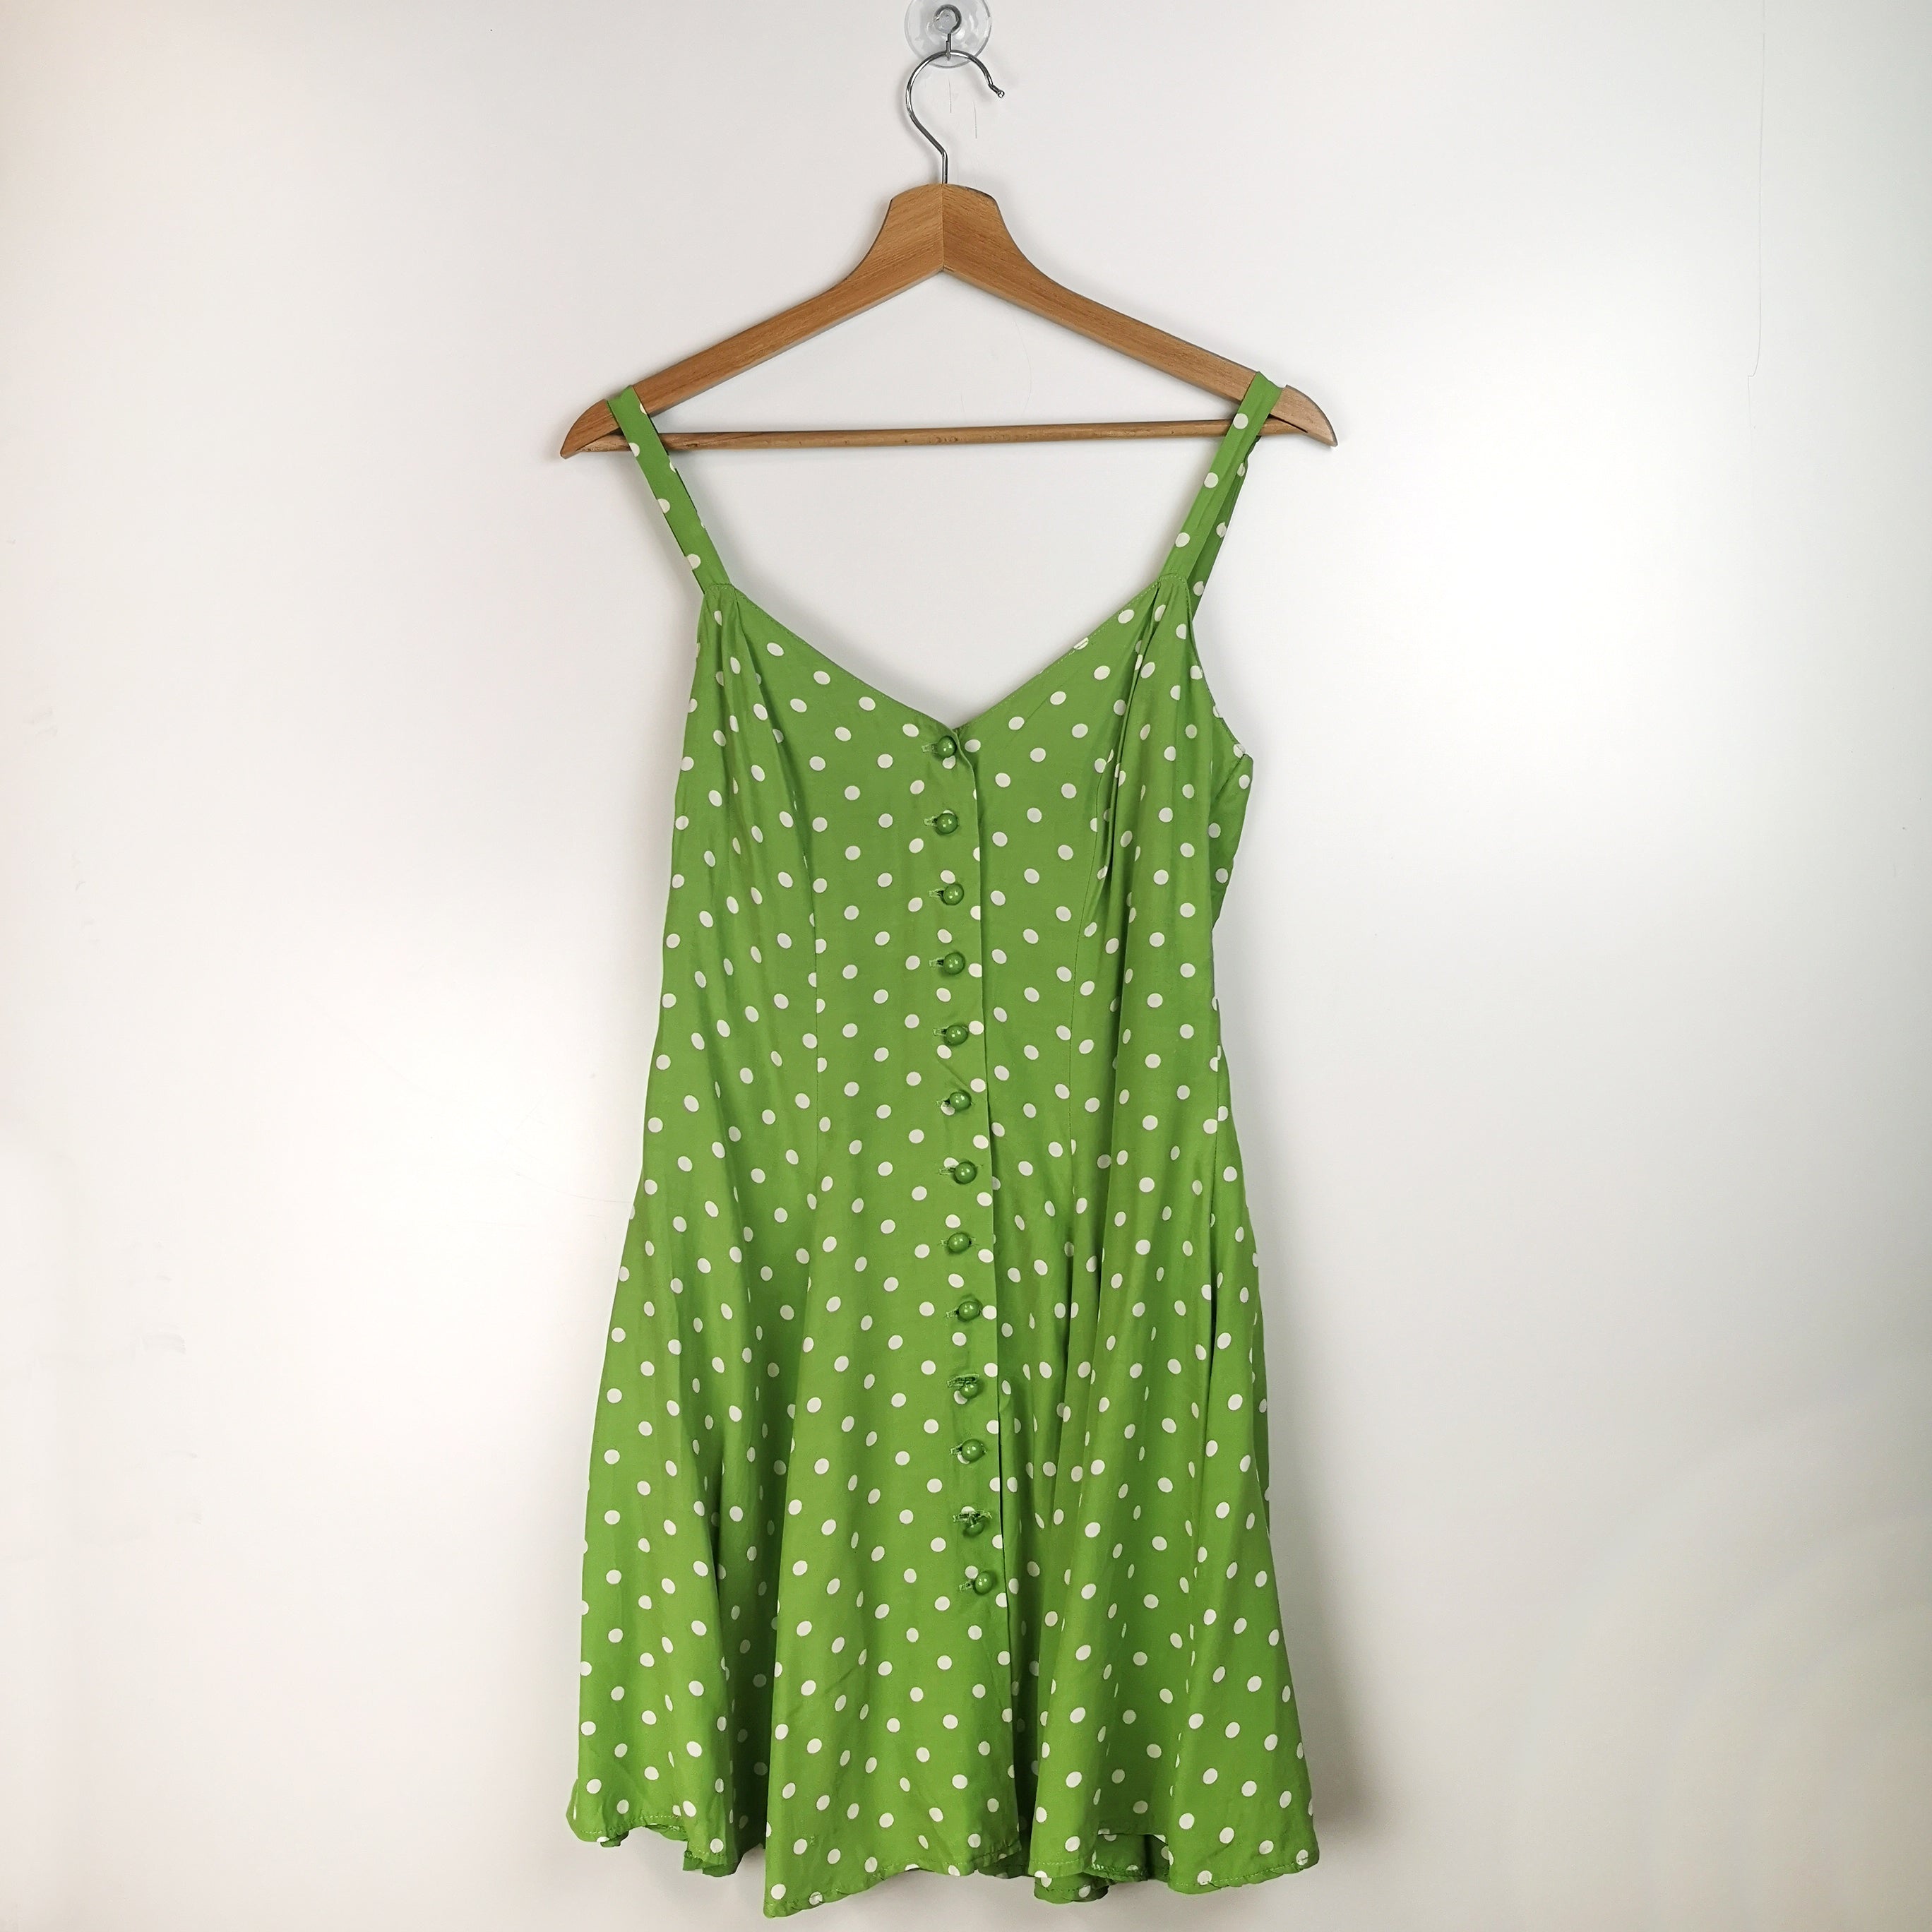 Strappy Green Polkadot Dress with Buttons